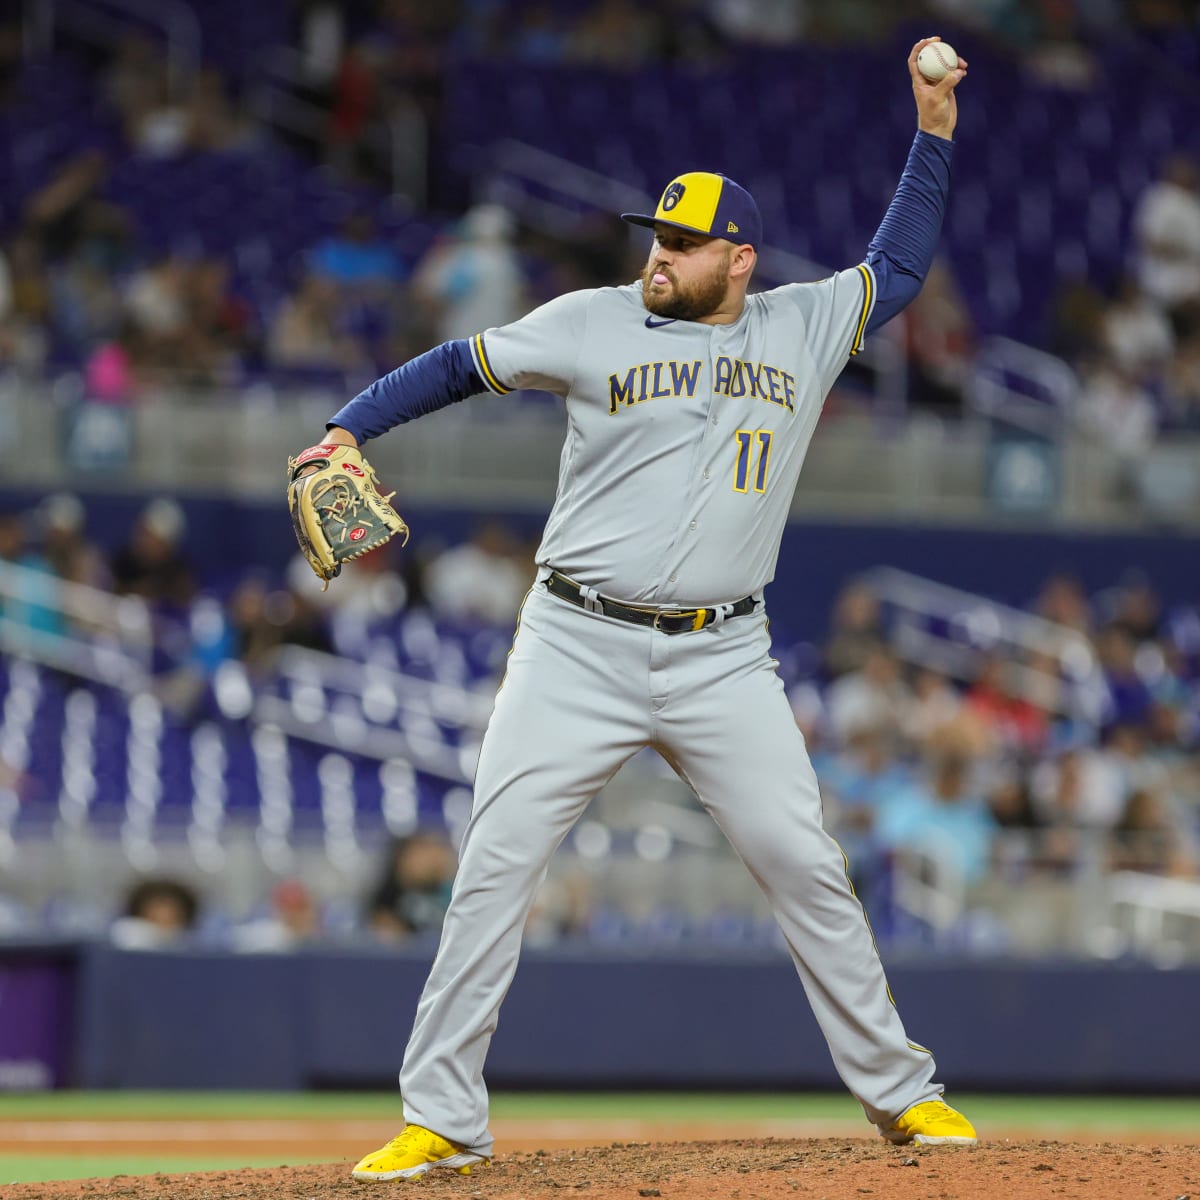 Brewers first baseman Rowdy Tellez ready for increased role in 2022